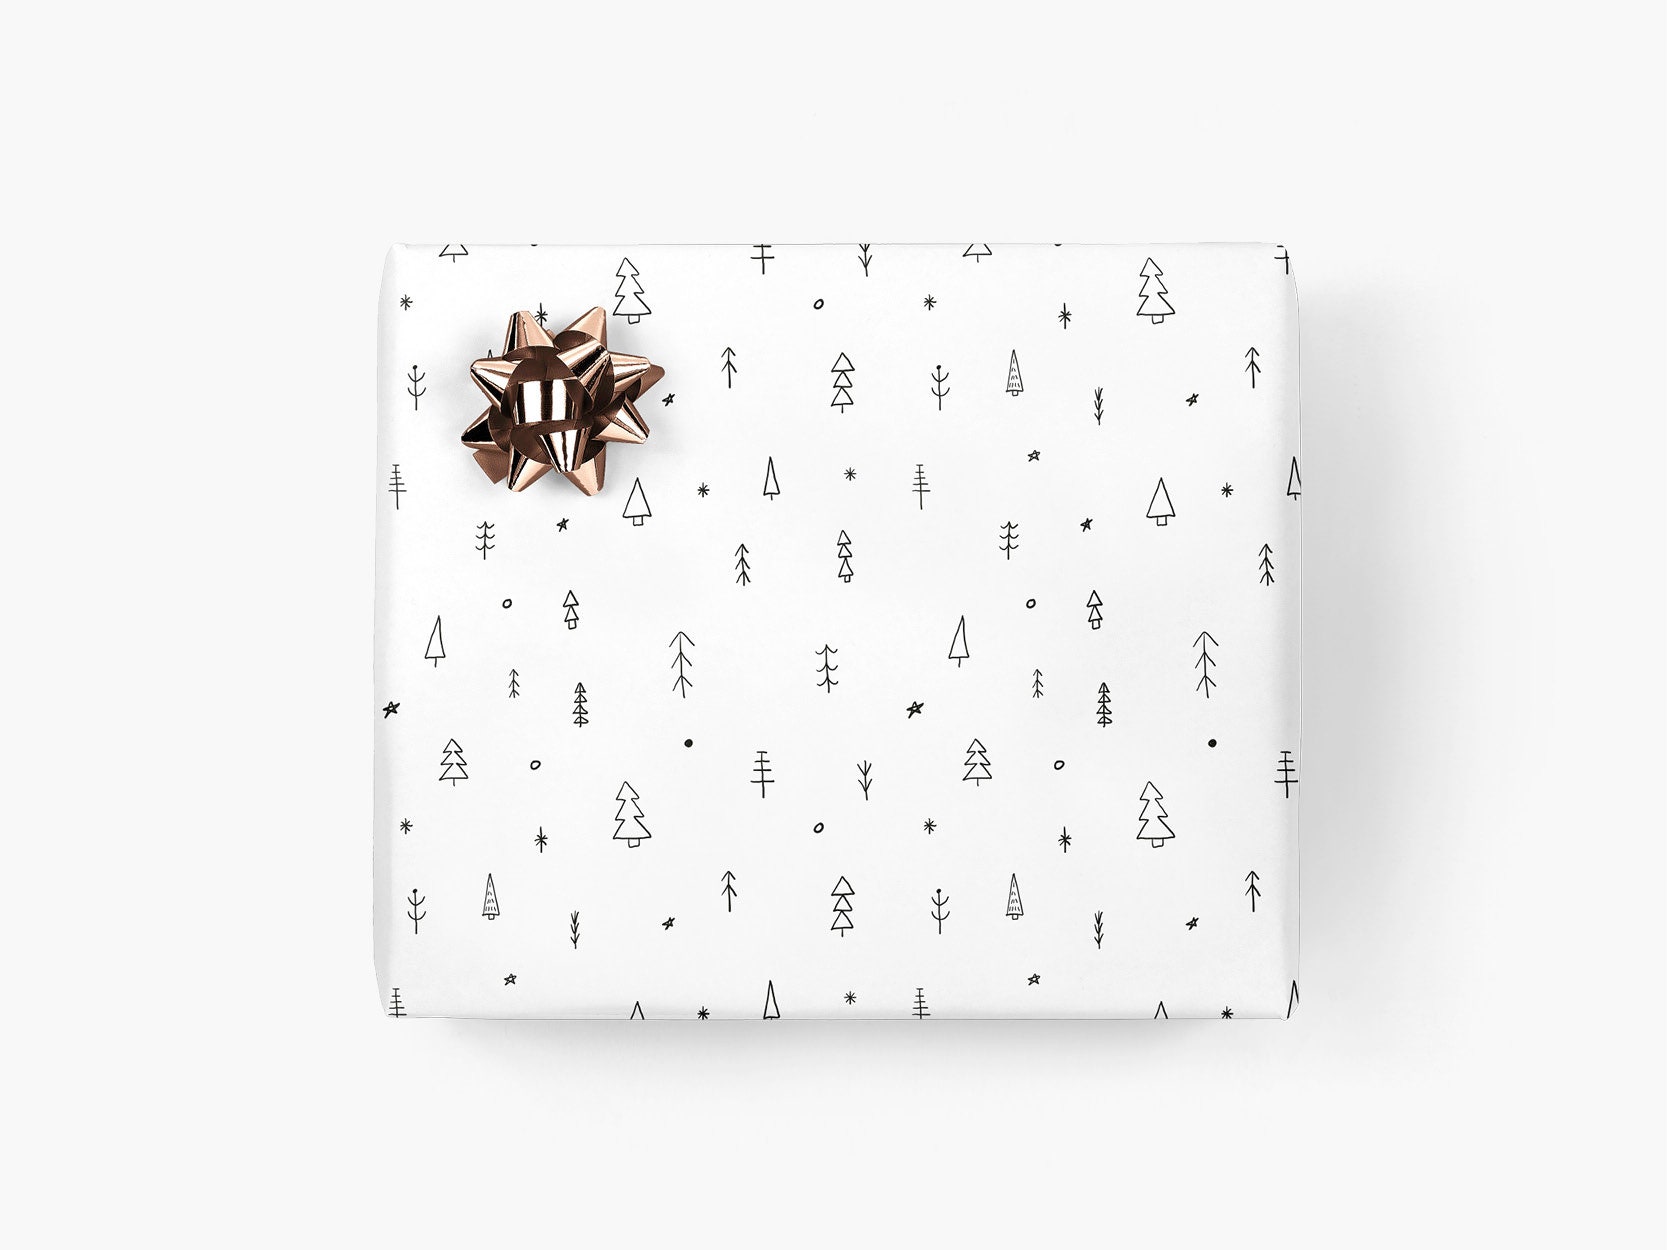 Eco-friendly Black and White Christmas Wrapping Paper Sheets From